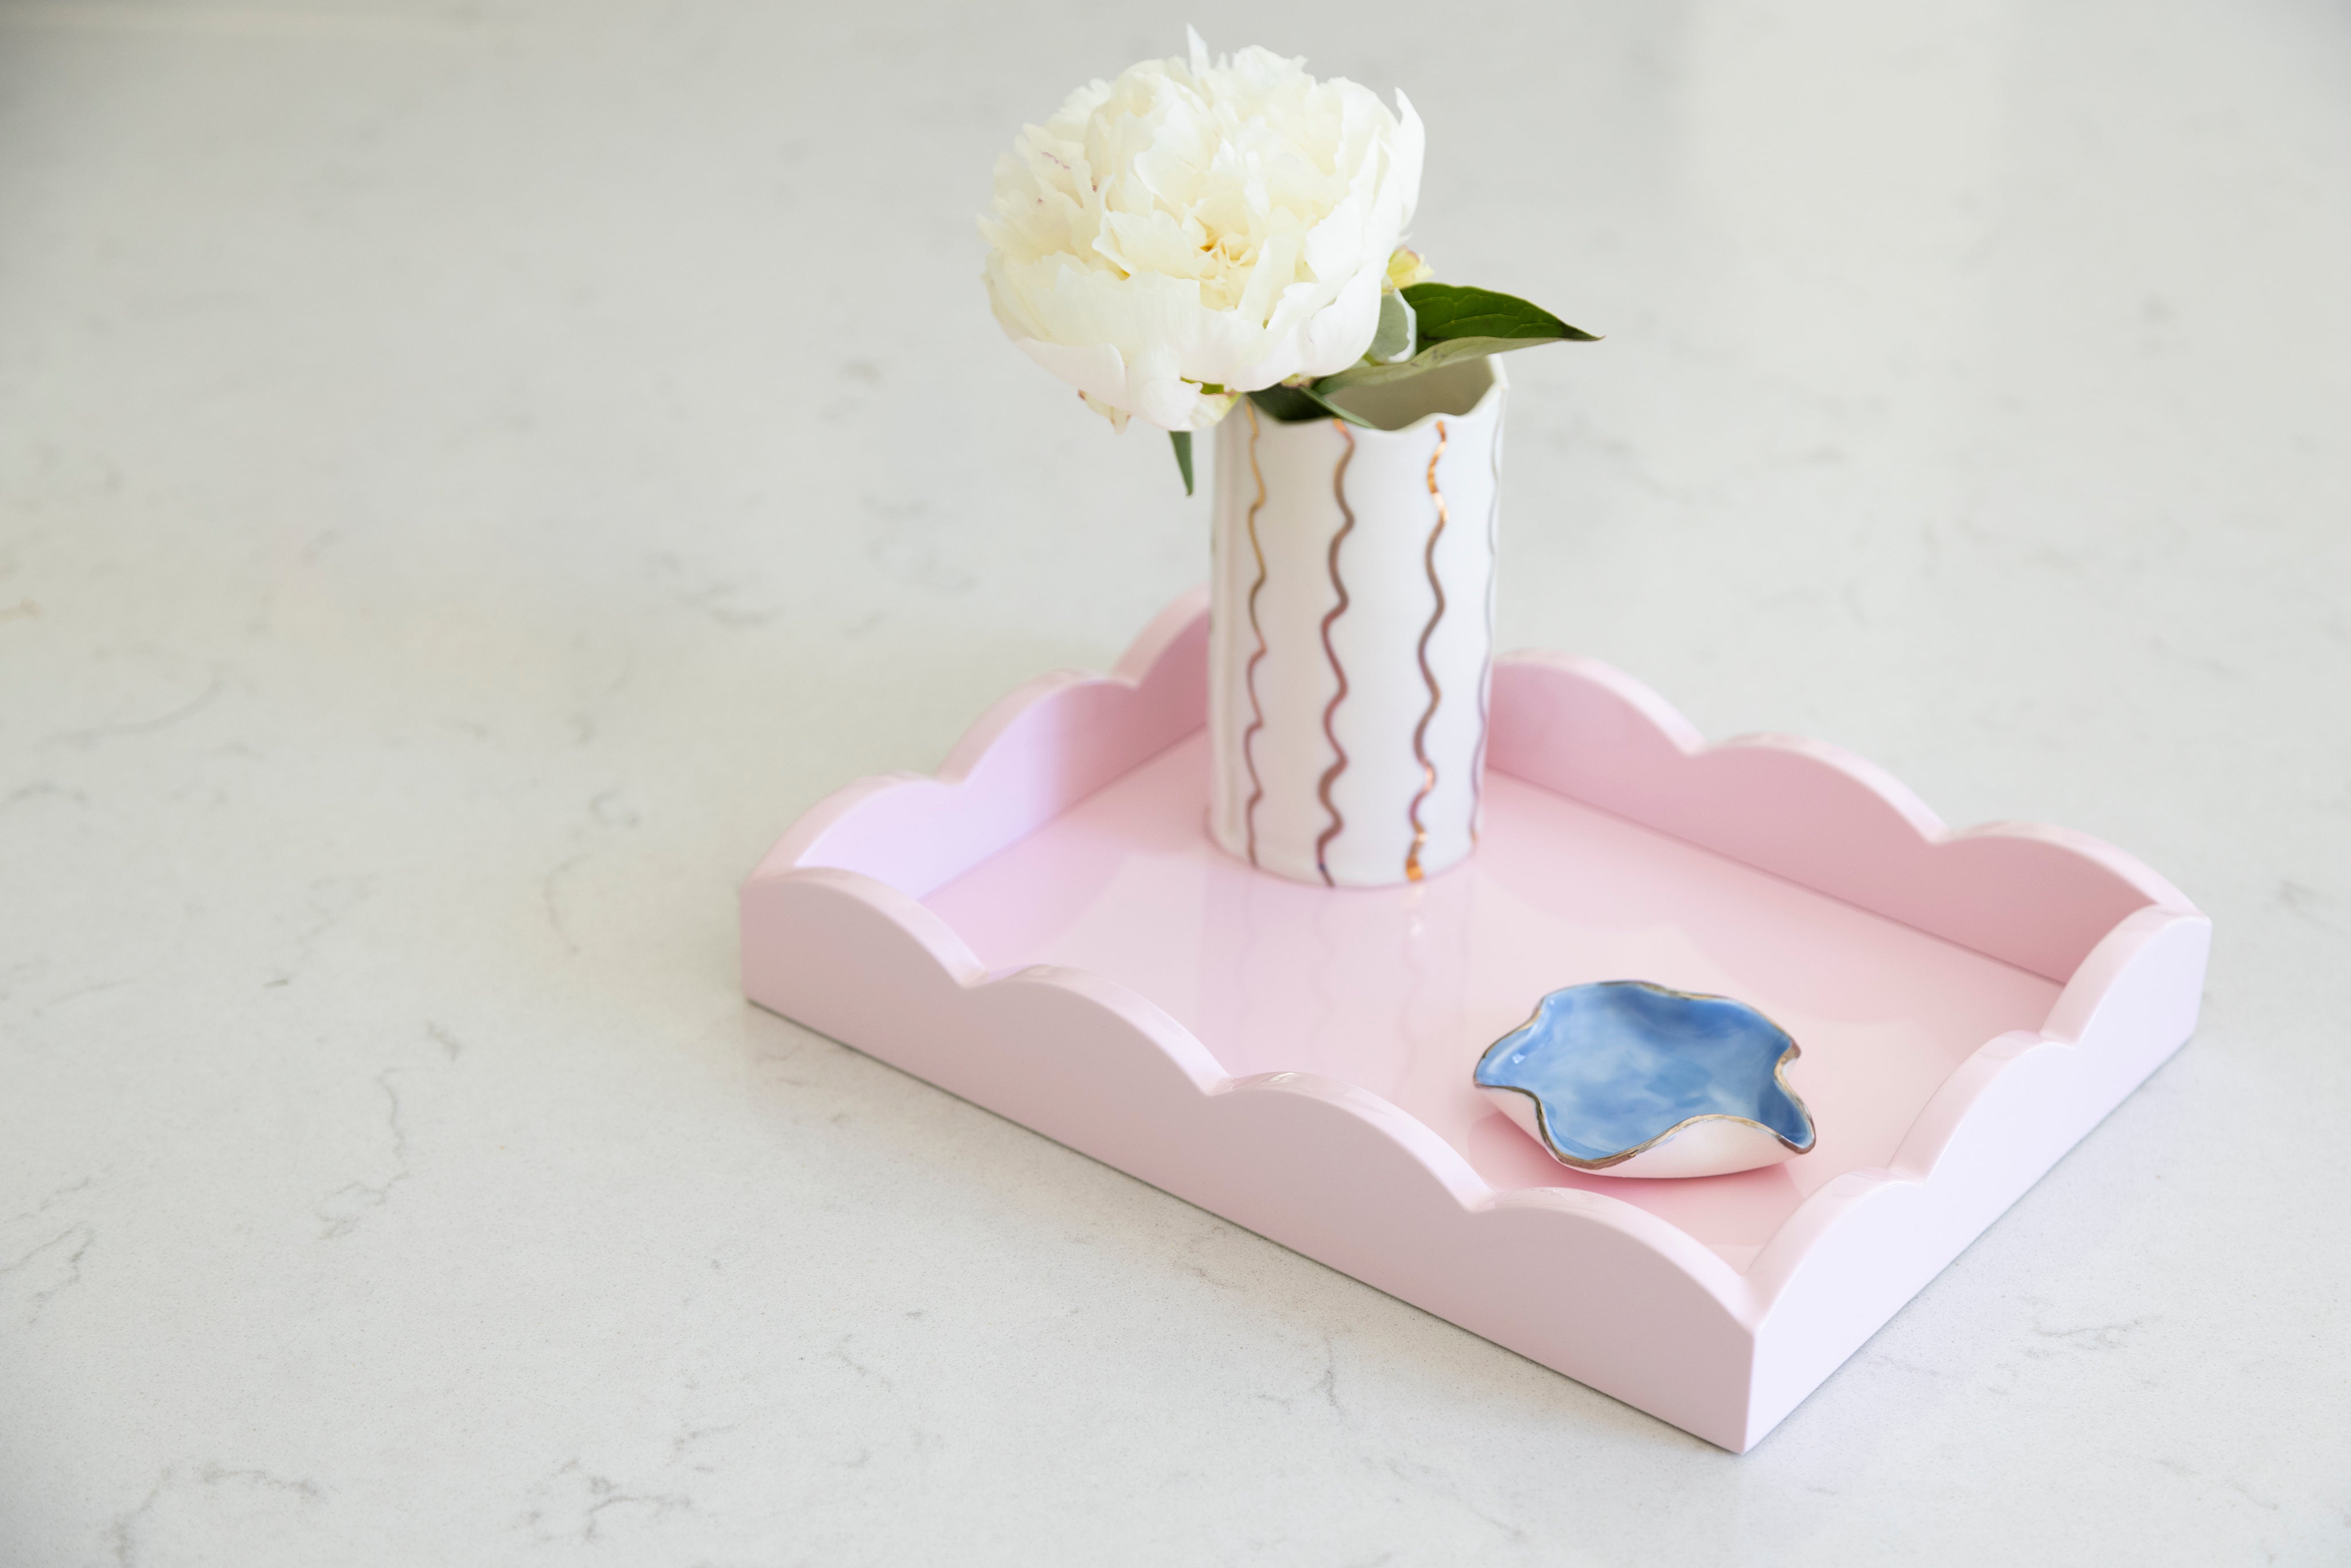 Small pale pink scalloped tray with Joanna Ling trinket dish and vase